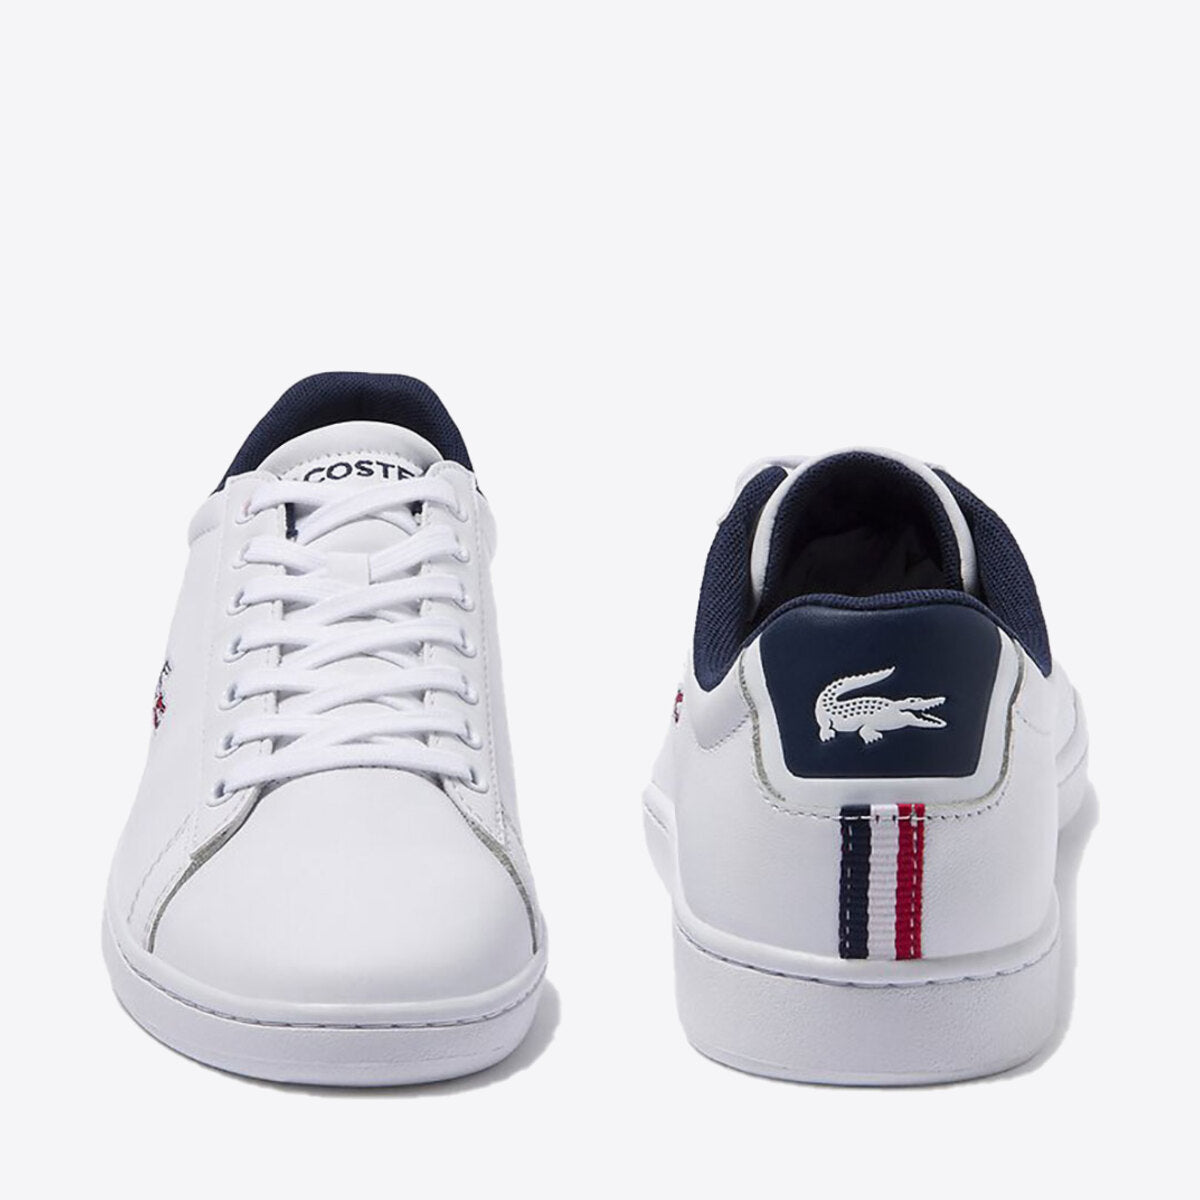 LACOSTE Carnaby Evo Tri1 Sneaker White/Navy/Red - Image 0